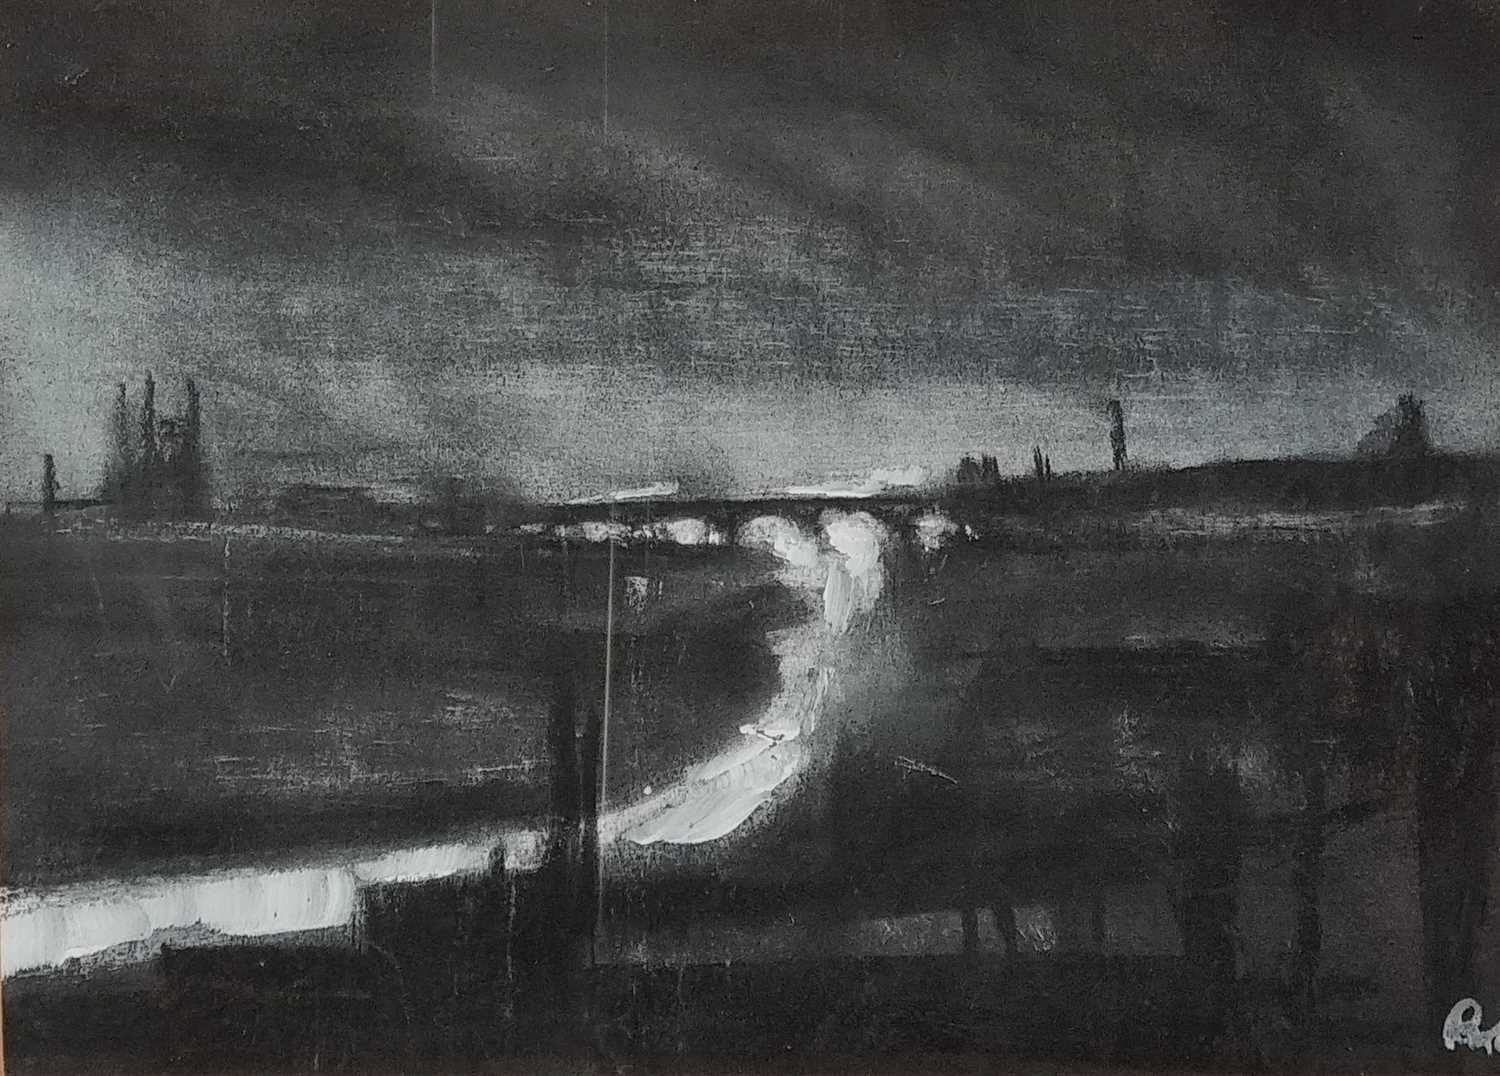 ƚ Paul MITCHELL (British b. 1974) Monotone Urban R9, Mixed media on paper, Signed with initials